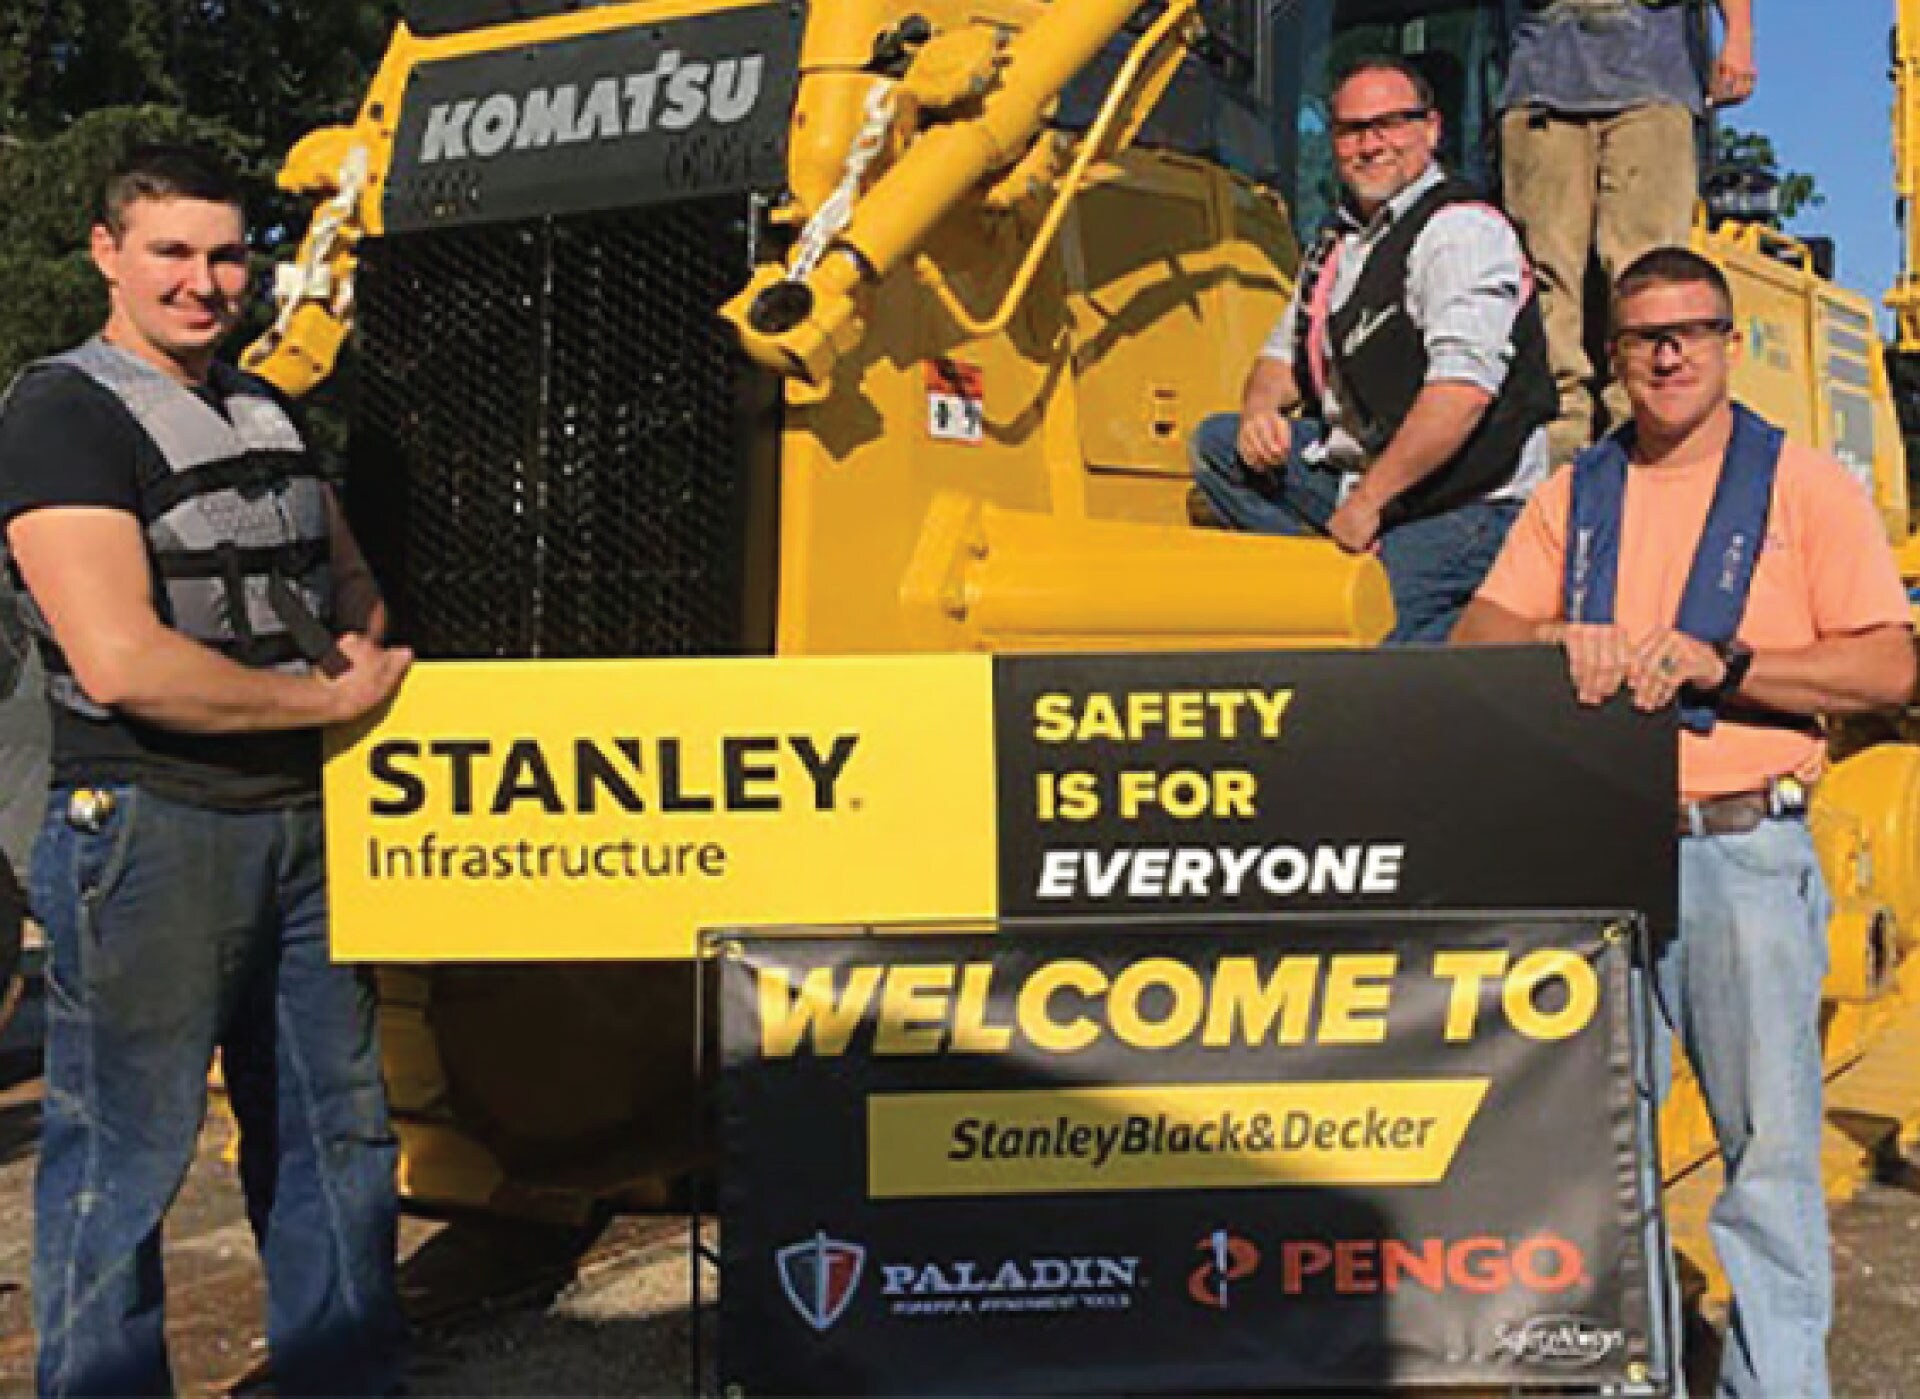 Stanley Black & Decker employees standing in front of heavy machinery while holding a banner welcoming PALADIN and Pengo to the company